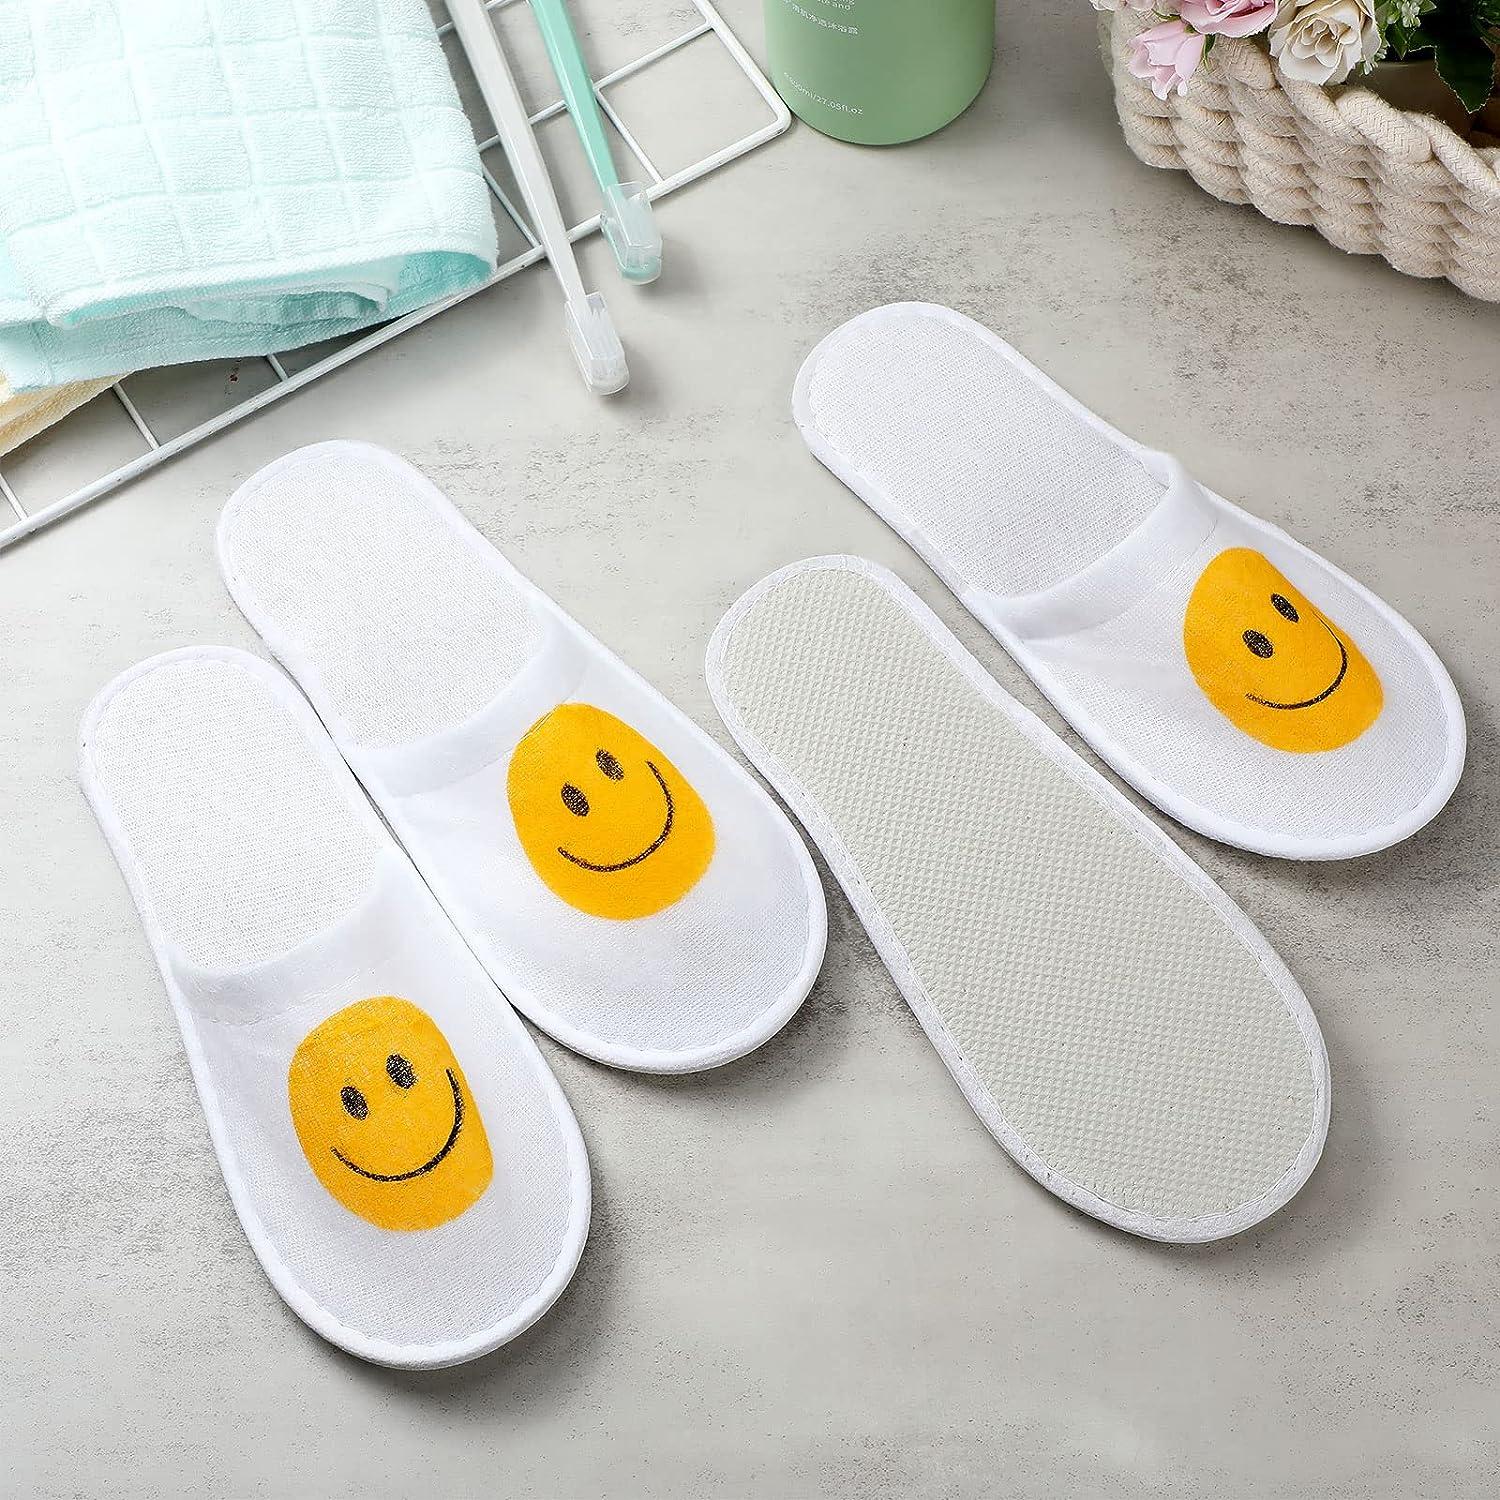 CROTUS Pure White Premium Foam Based Disposable Bathroom Slippers 7 mm  Sole, Large Size -Combo of 5 : Amazon.in: Fashion